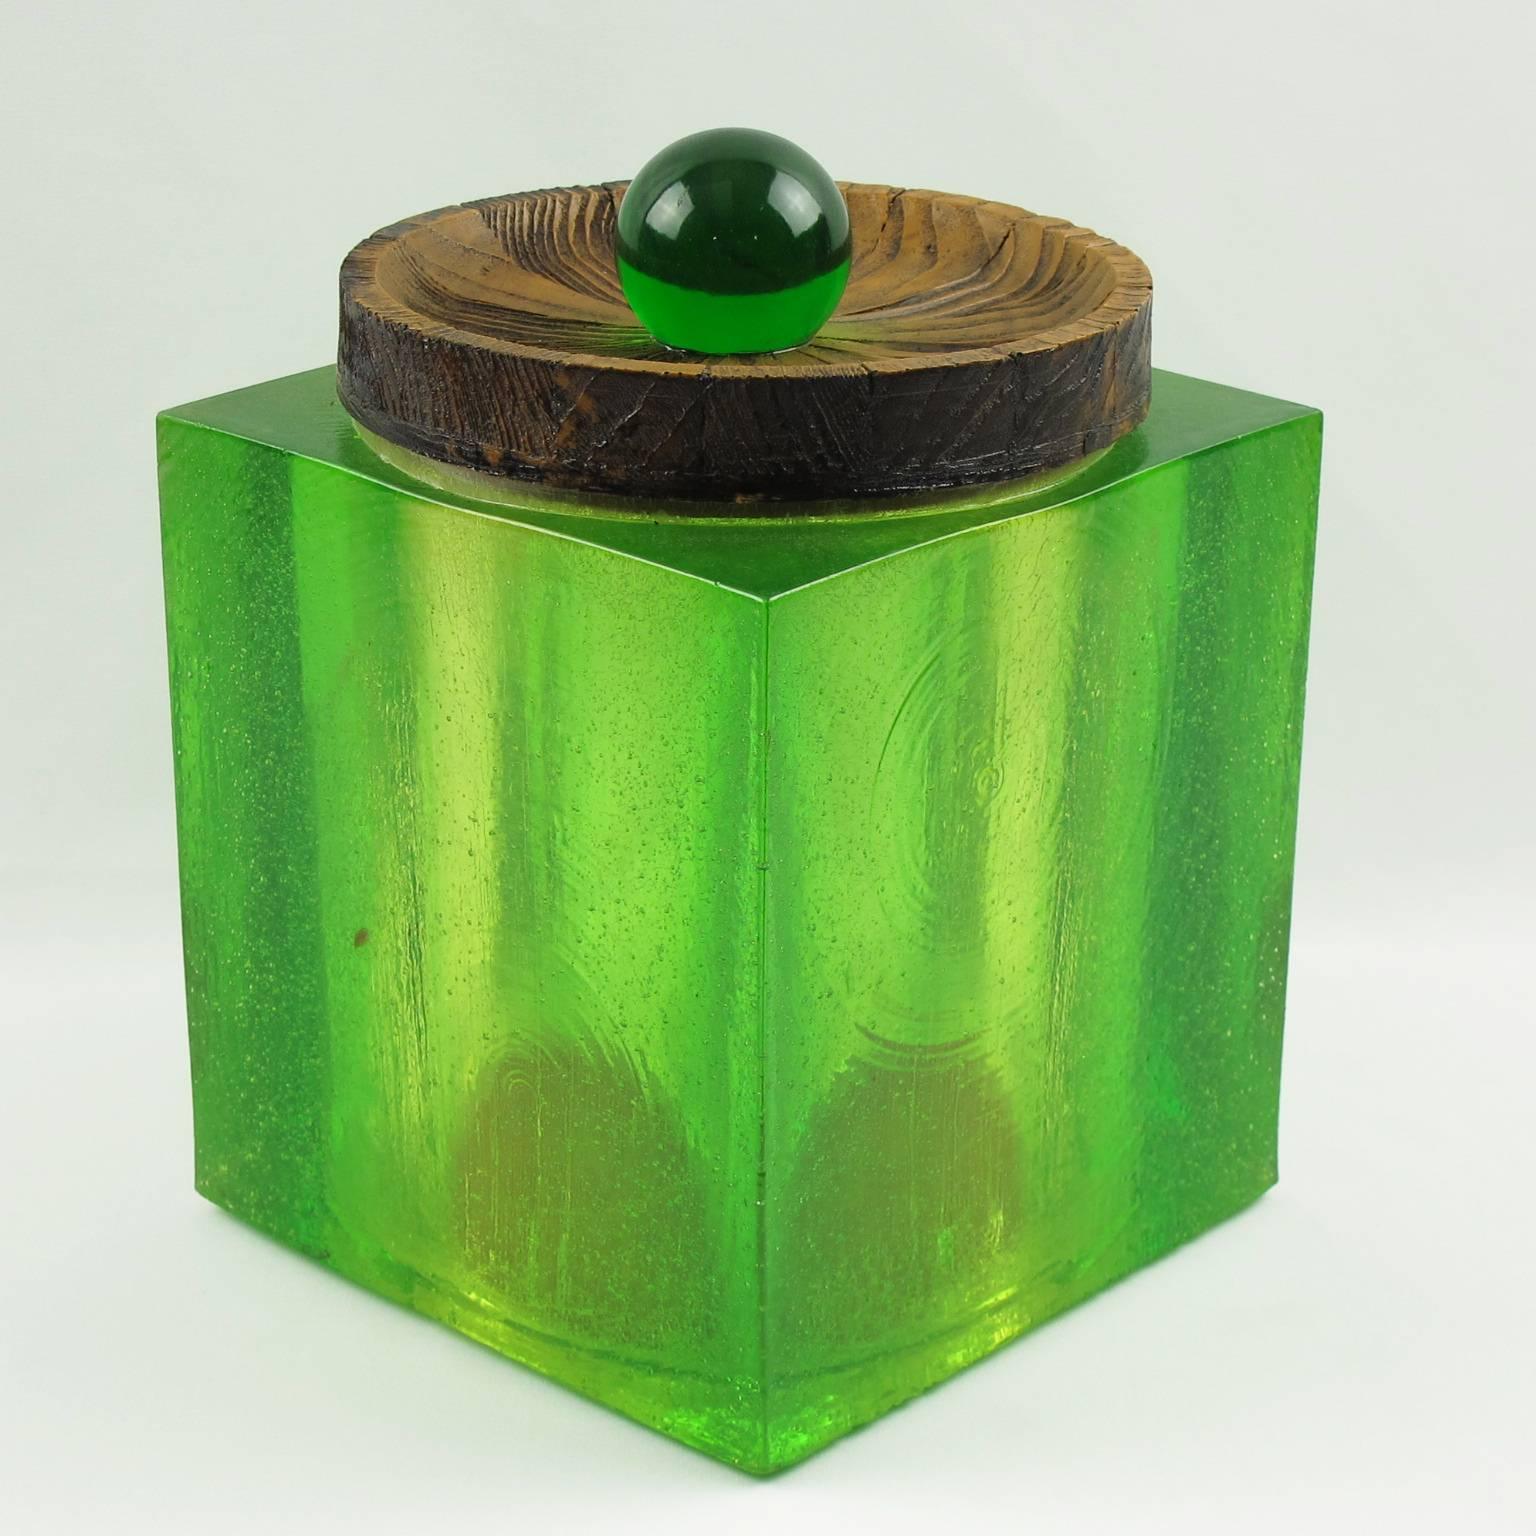 Stunning Mid-Century Modern barware accessory by Colorflo Decorator Products. Tall cubical shape body with incredible resin in key lime green color. The material really captures the light and totally glows, a cool statement piece. Design with